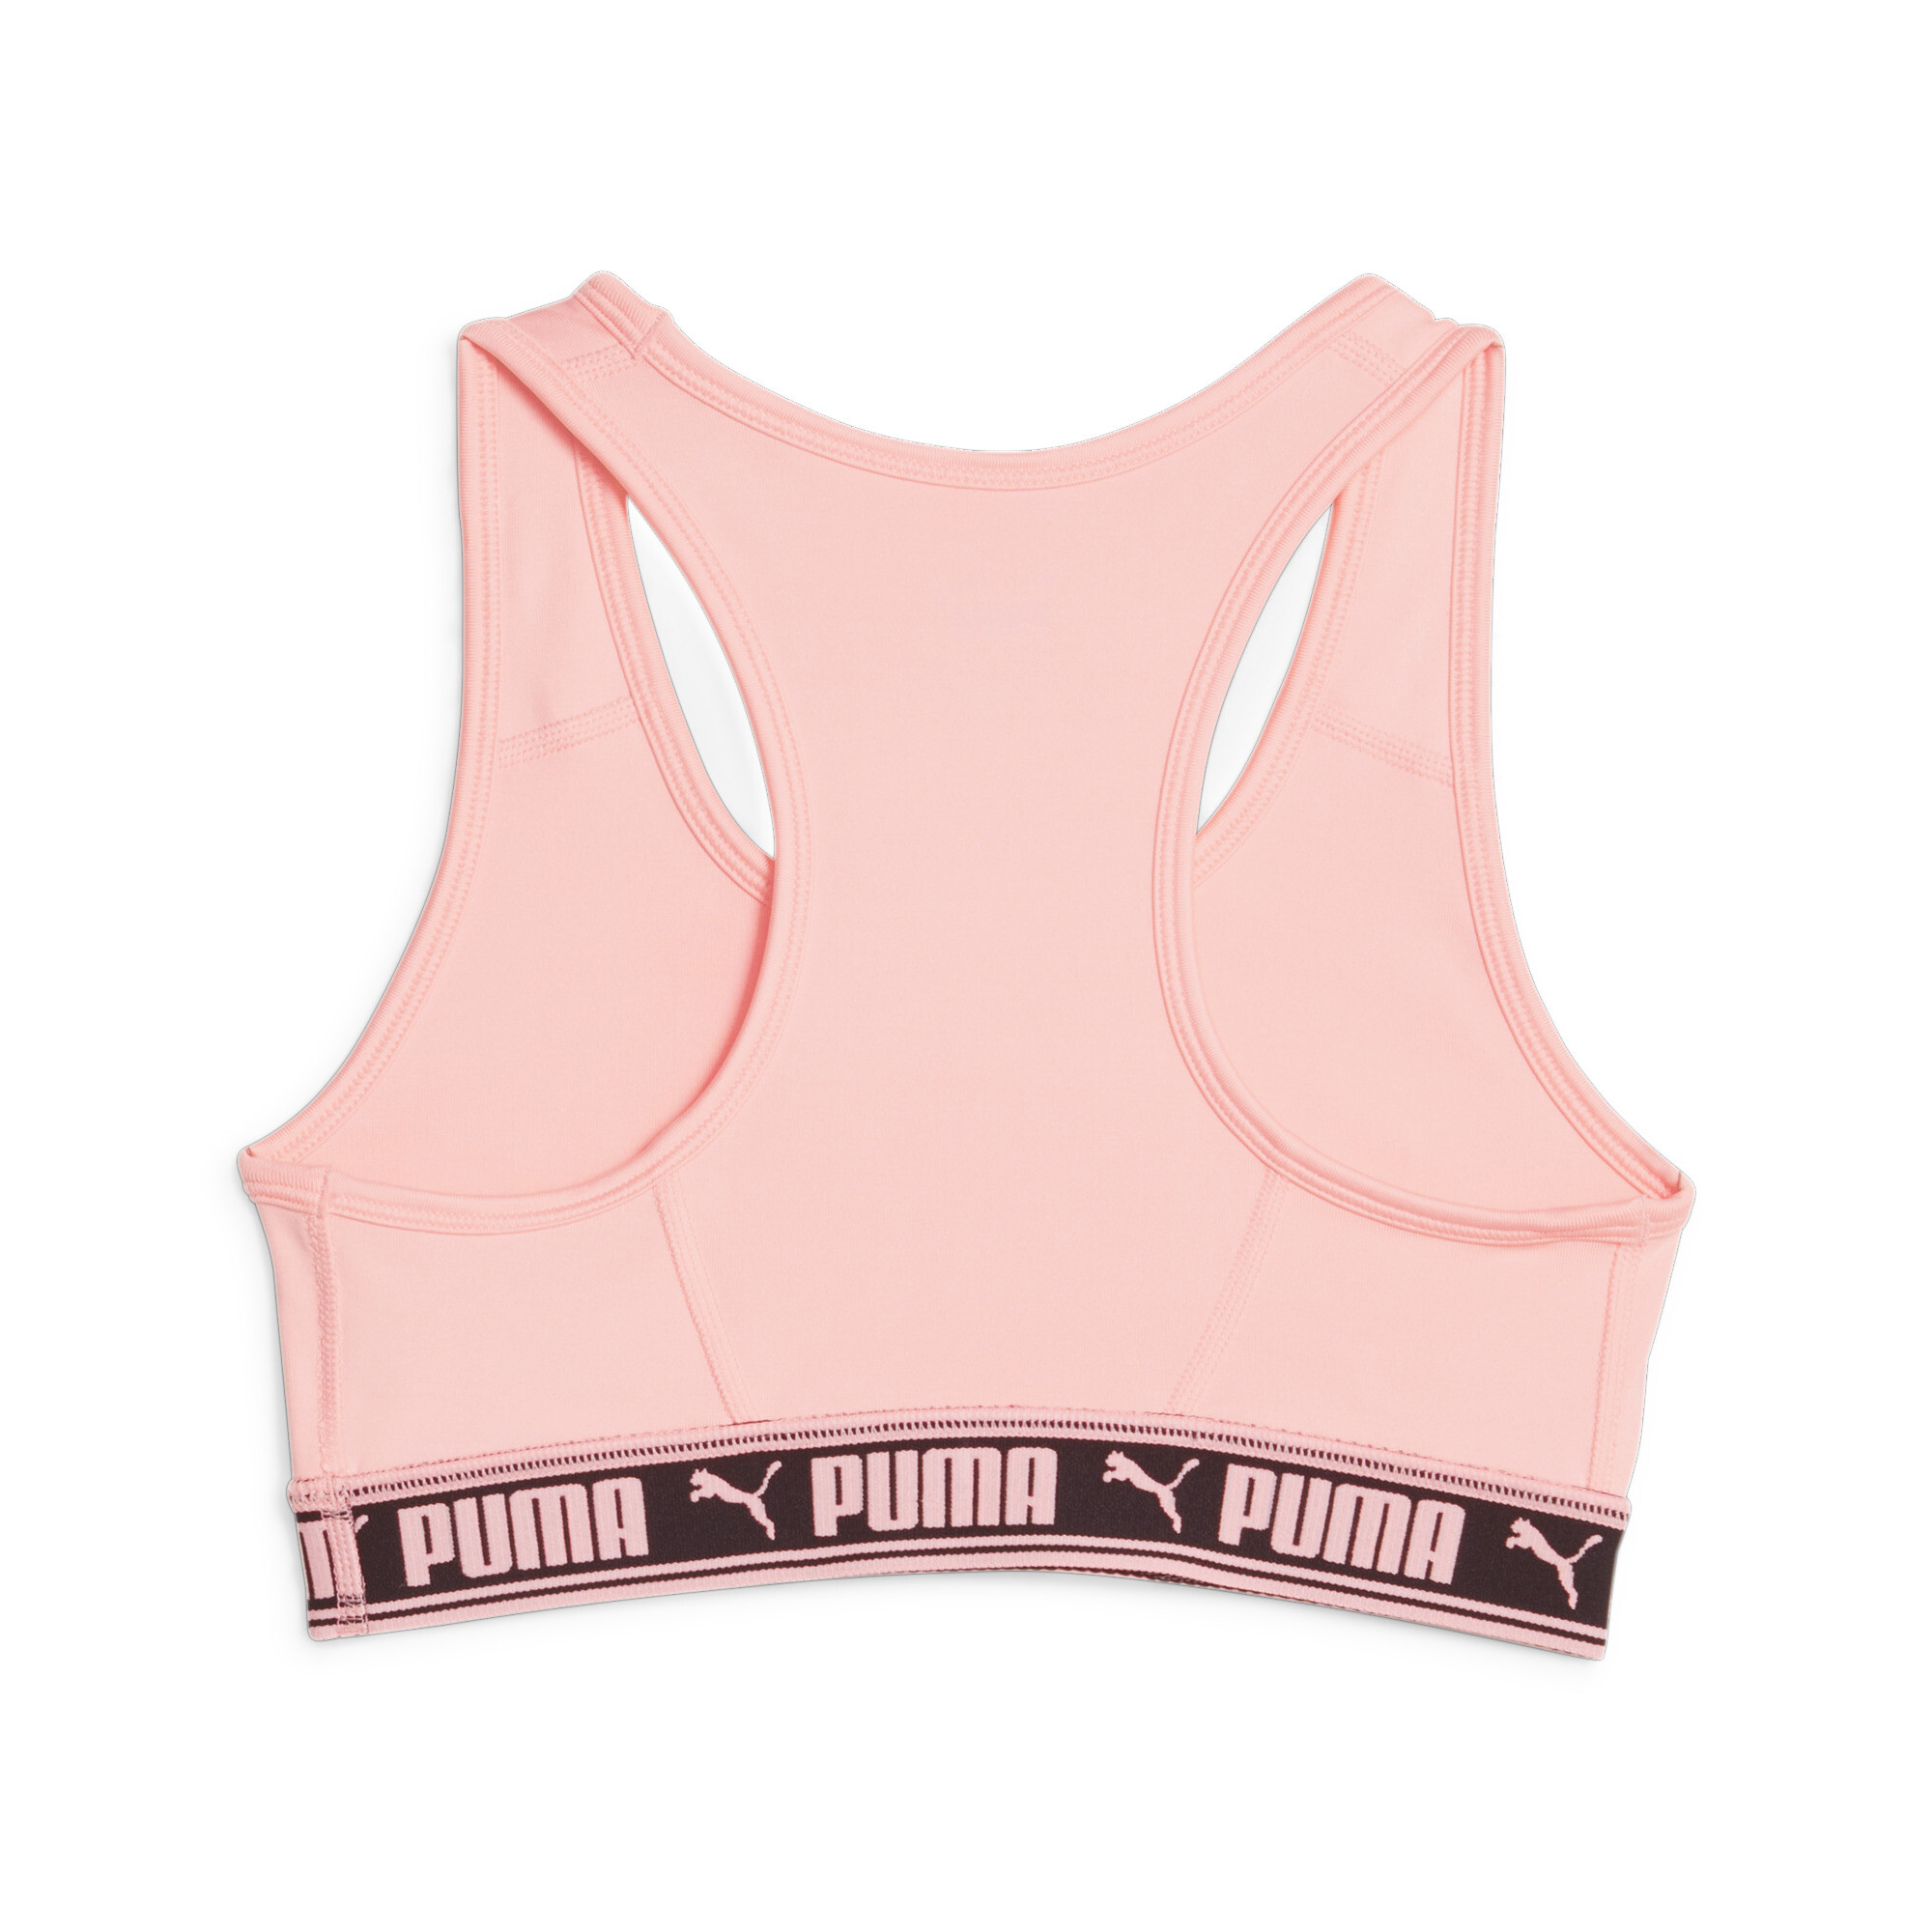 Women's Puma Strong Bra Youth, Pink, Size 13-14Y, Clothing